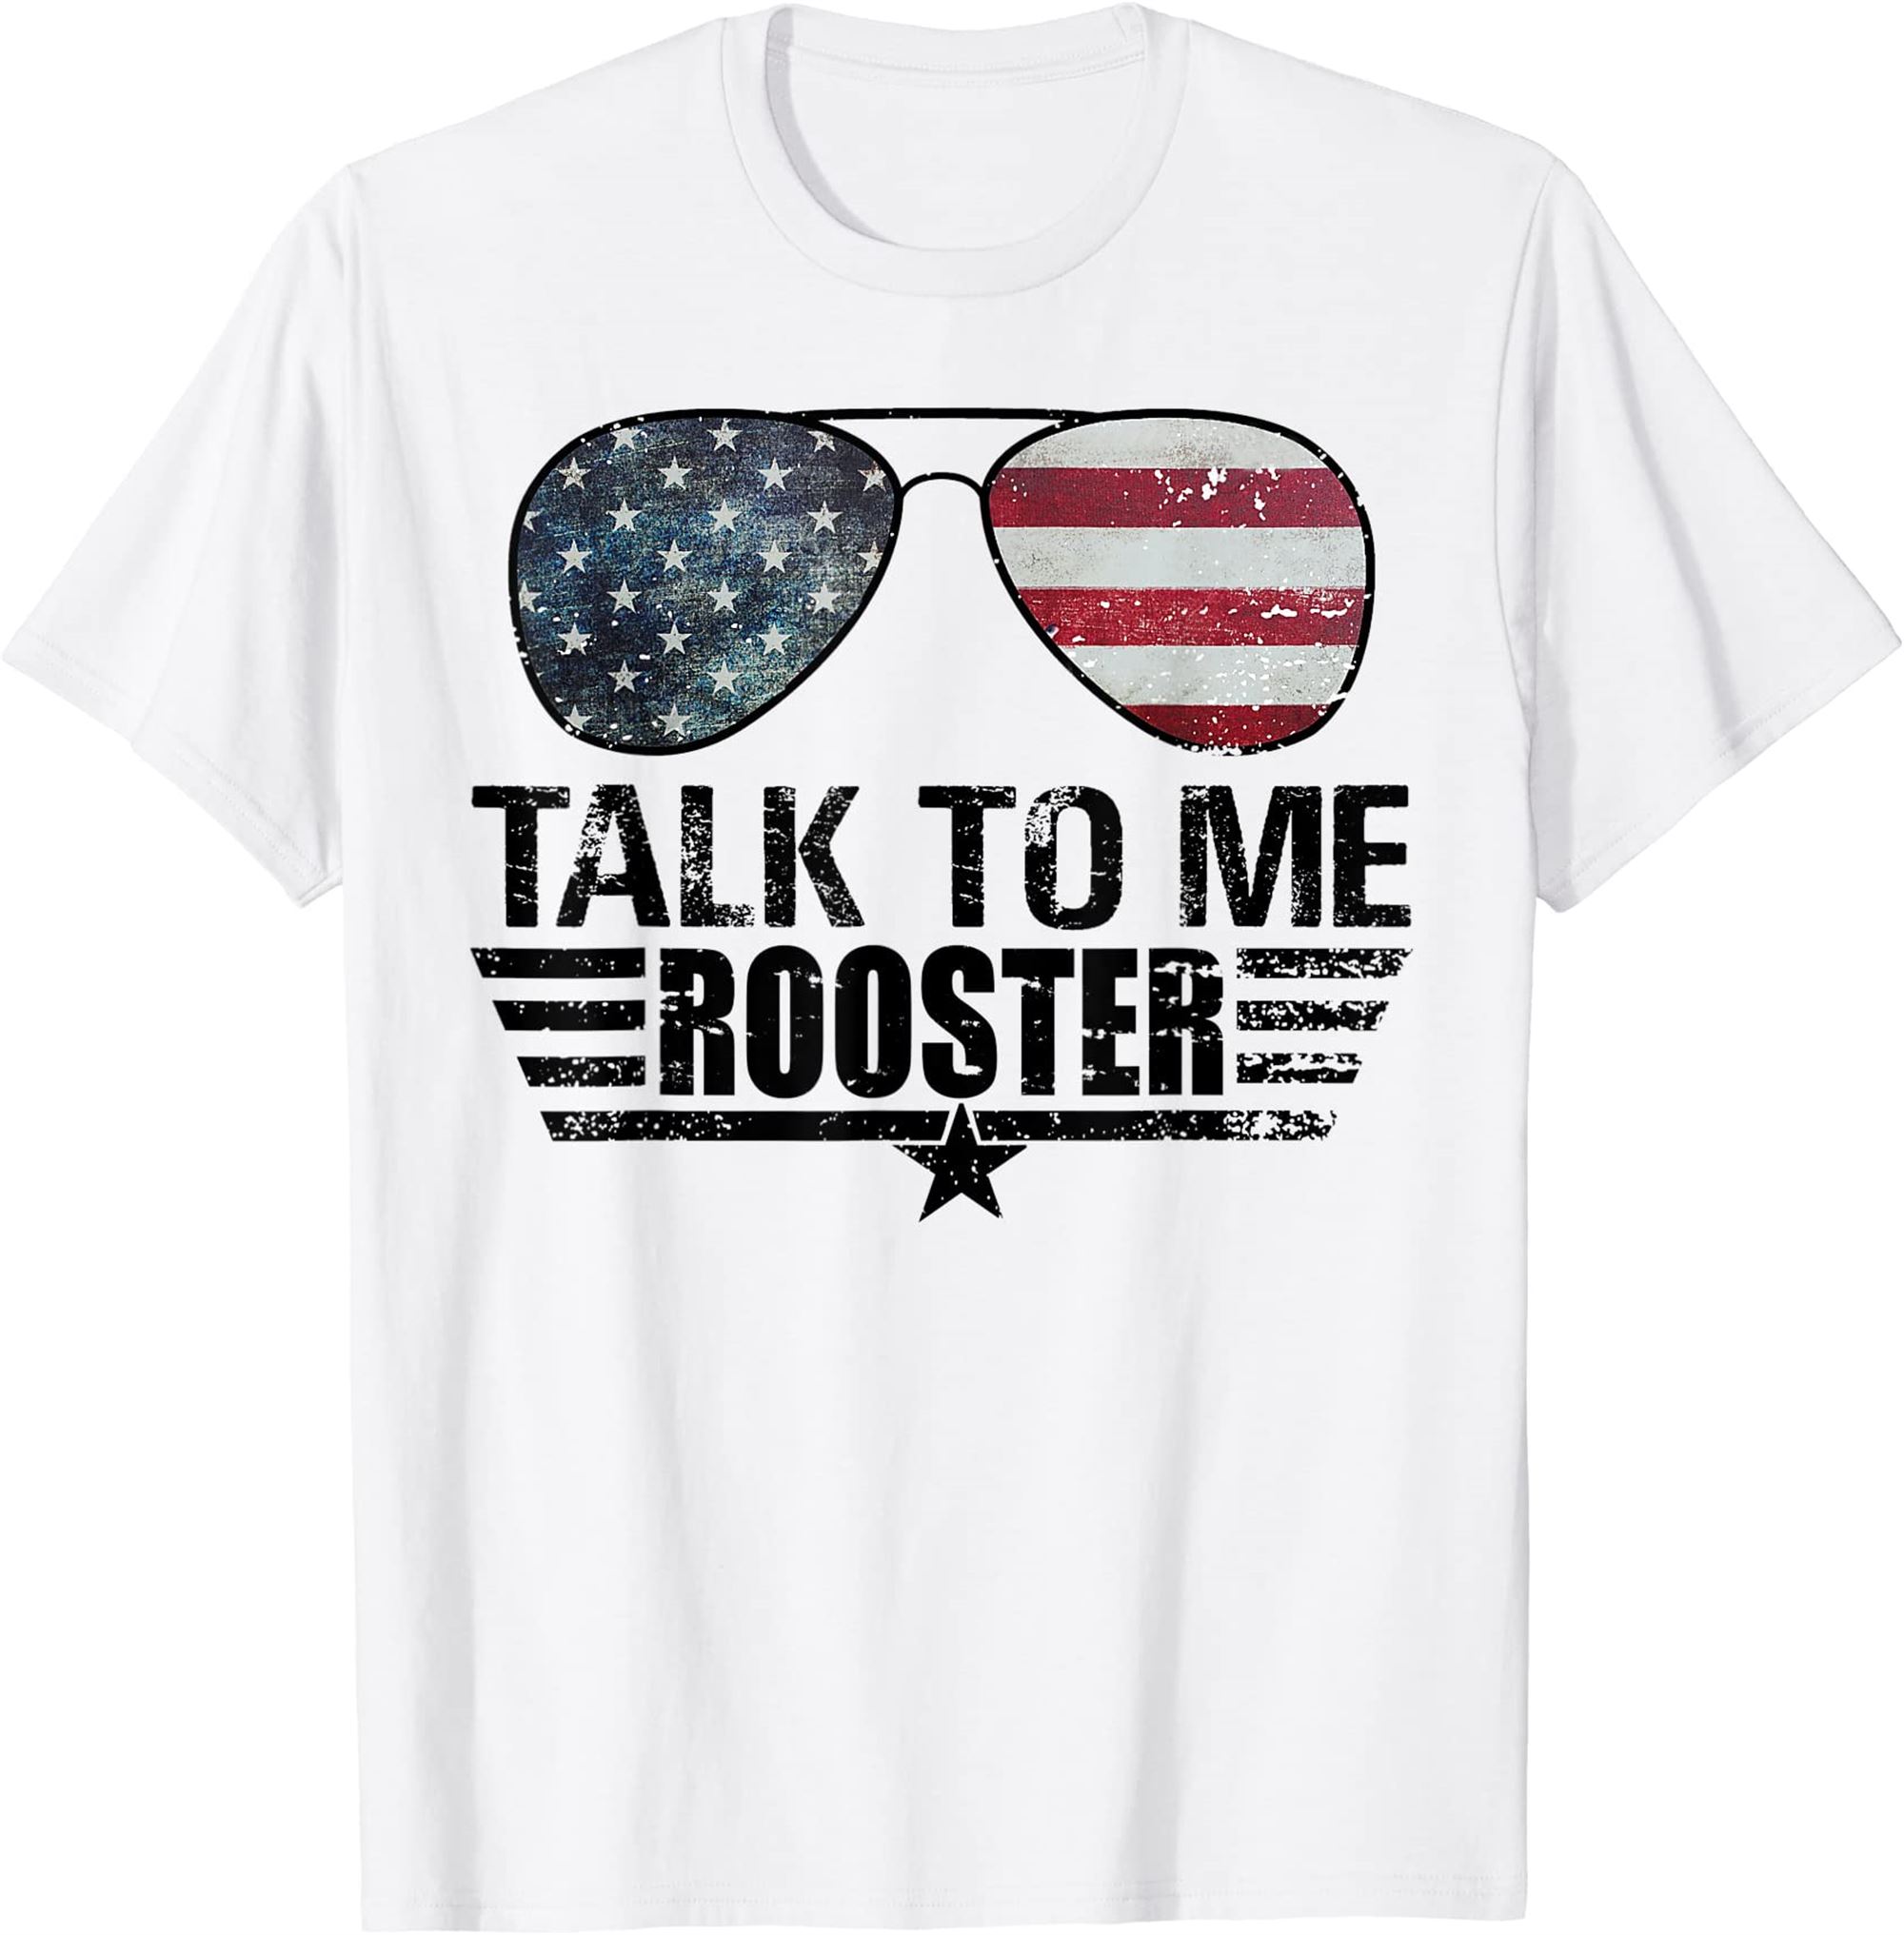 Talk To Me Rooster T-shirt Full Size Up To 5xl